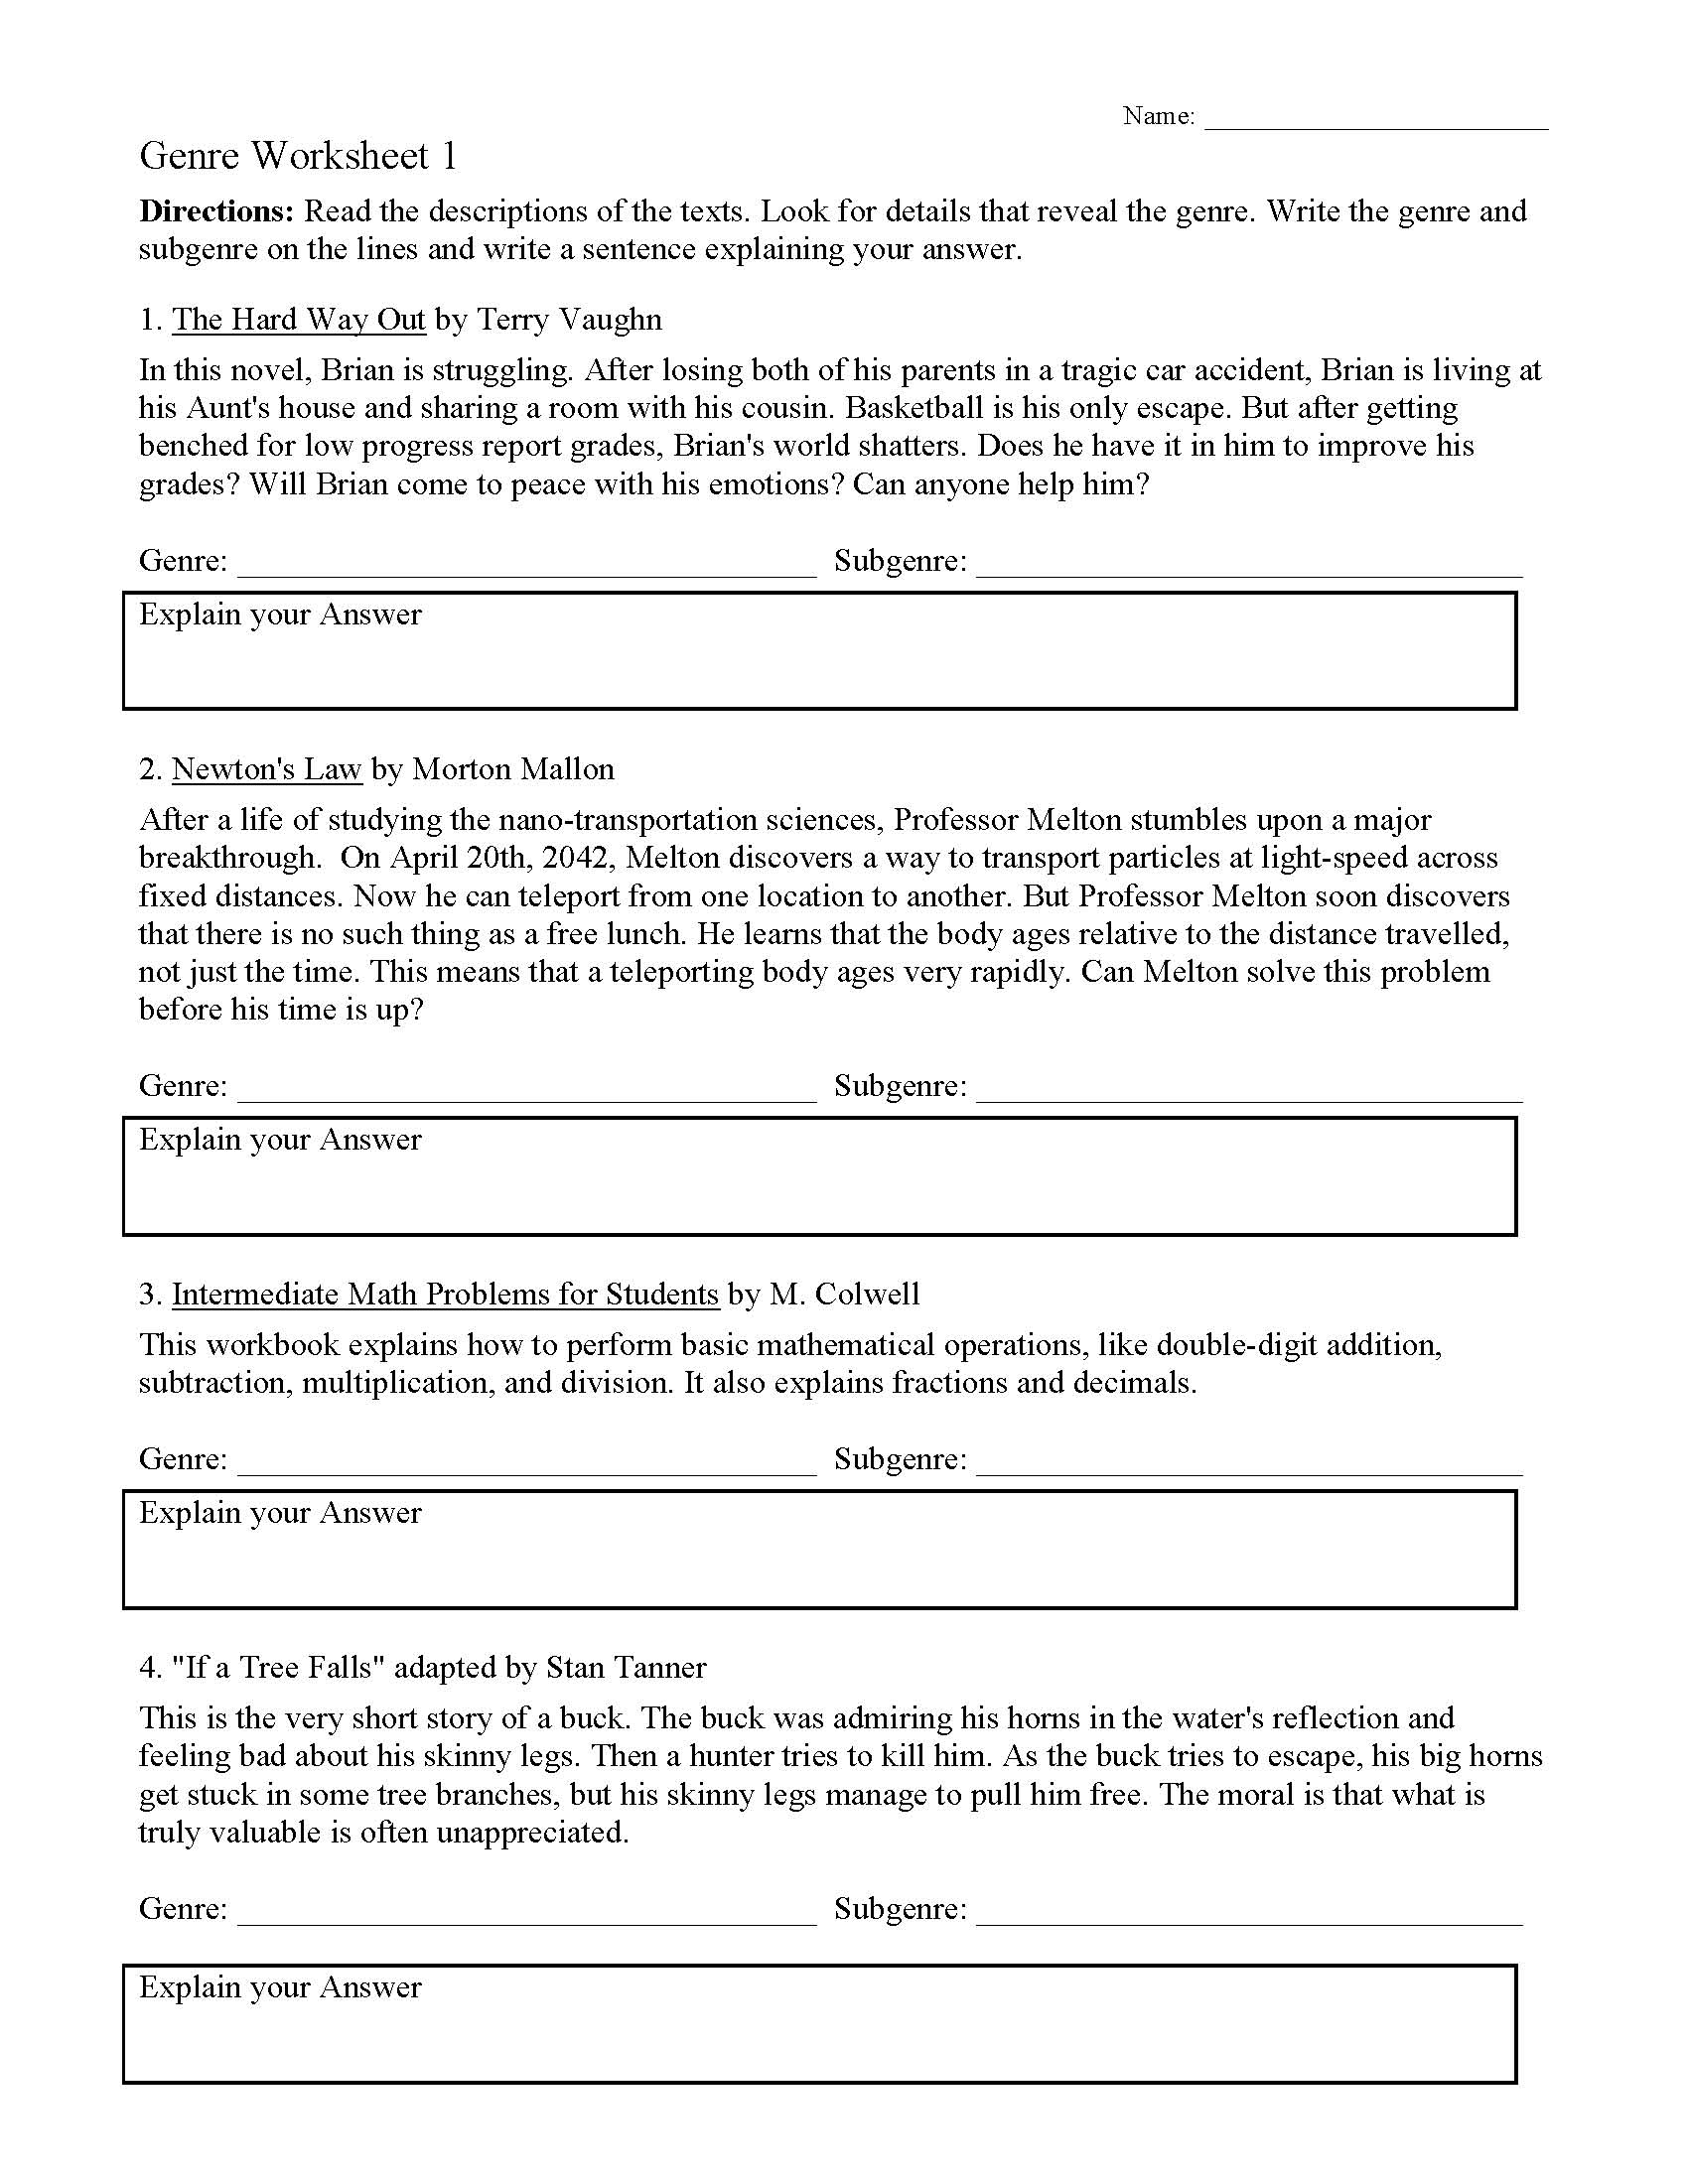 This is a preview image of Genre Worksheet 1. Click on it to enlarge it or view the source file.